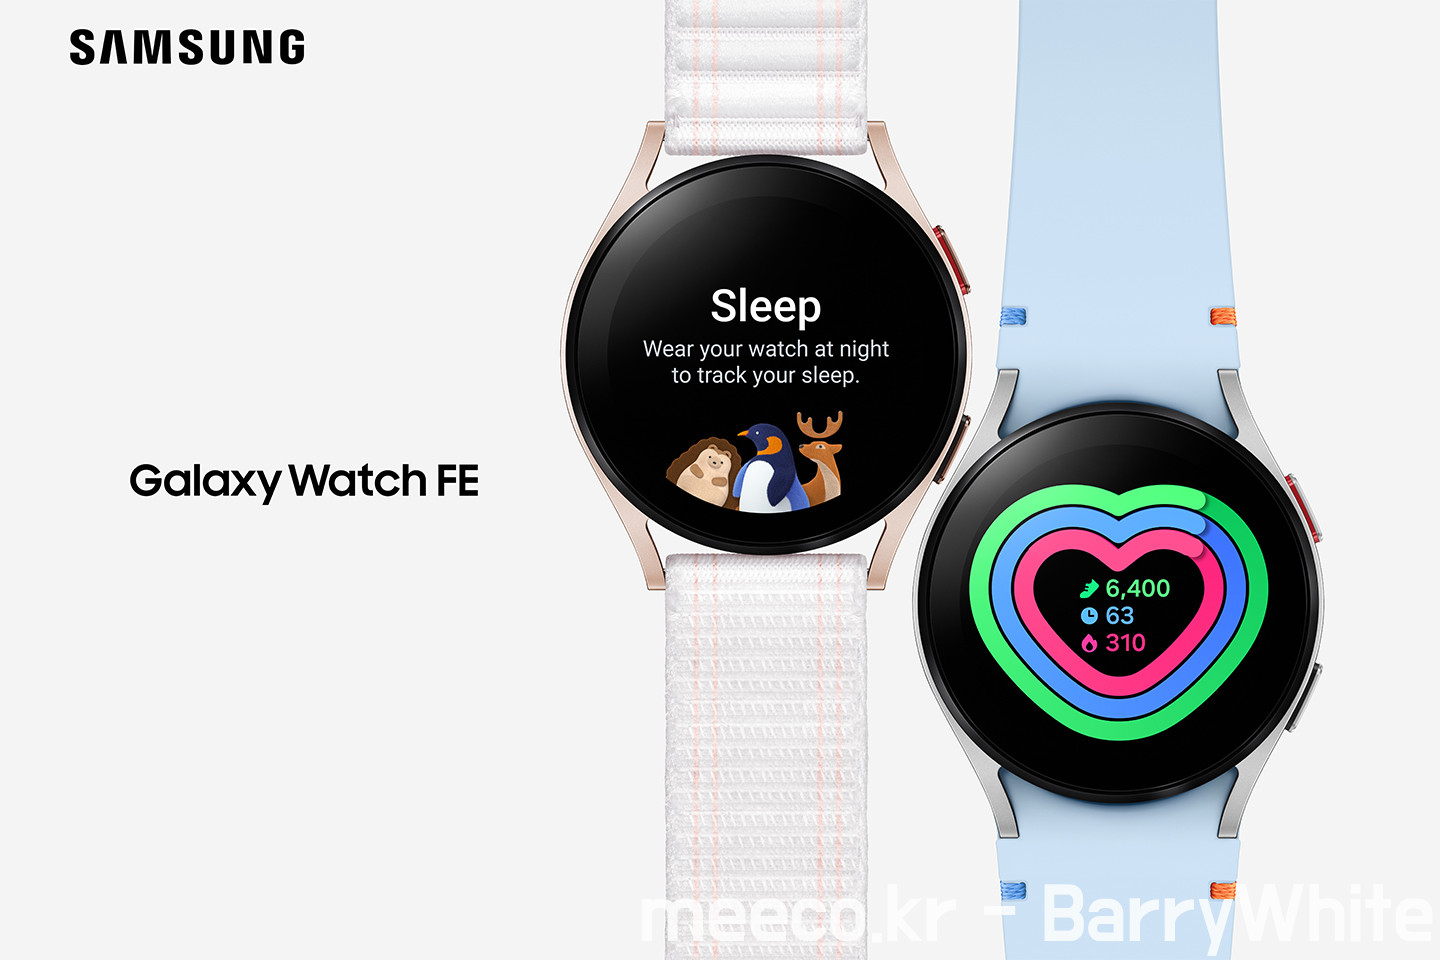 001-First-Galaxy-Watch-FE-Empowers-Even-More-Users-With-Samsungs-Advanced-Health-Monitoring-Technology.jpg